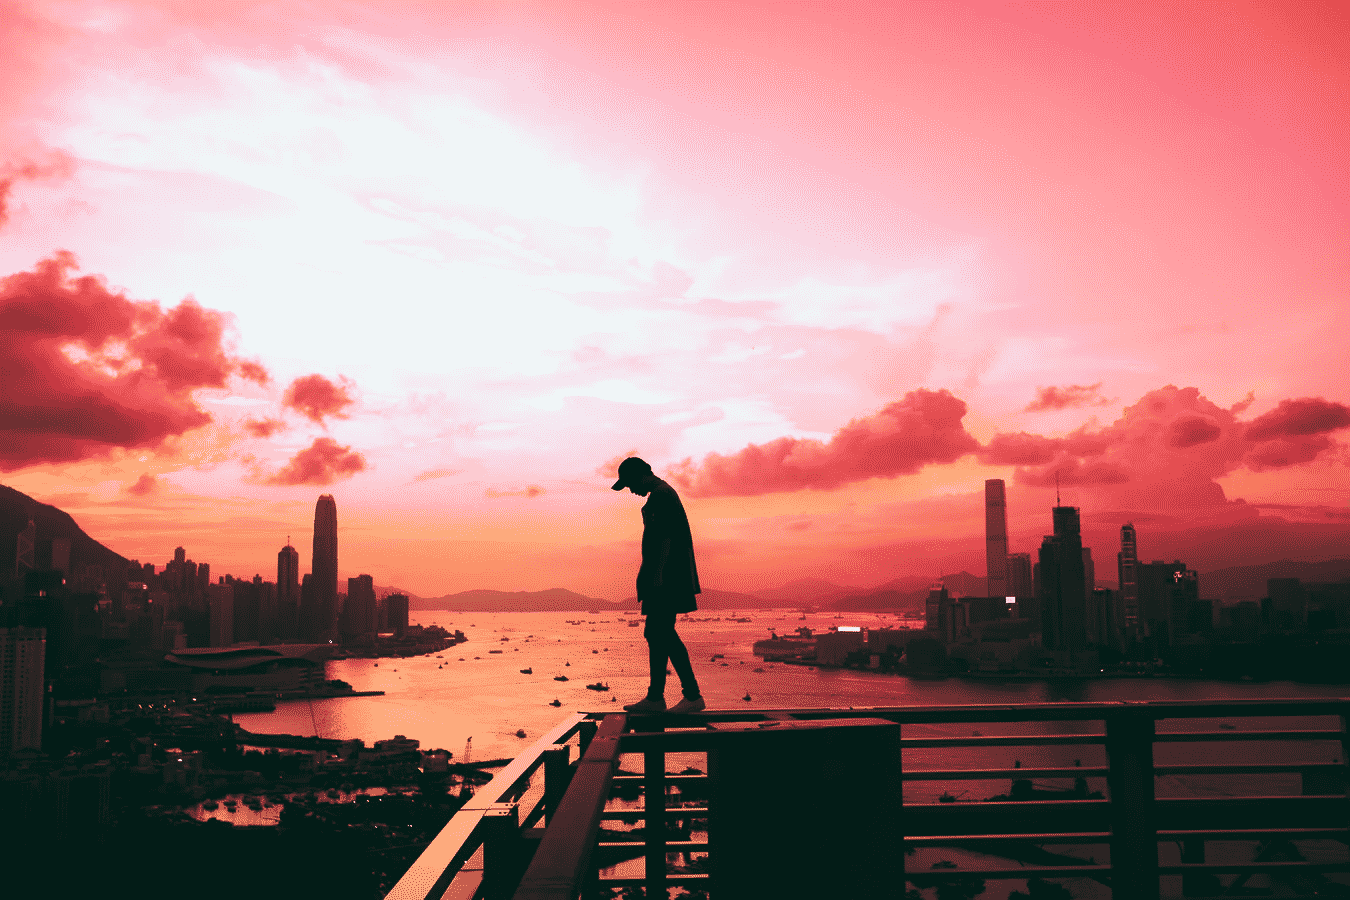 Silhouette of person standing on railing against pink sunset